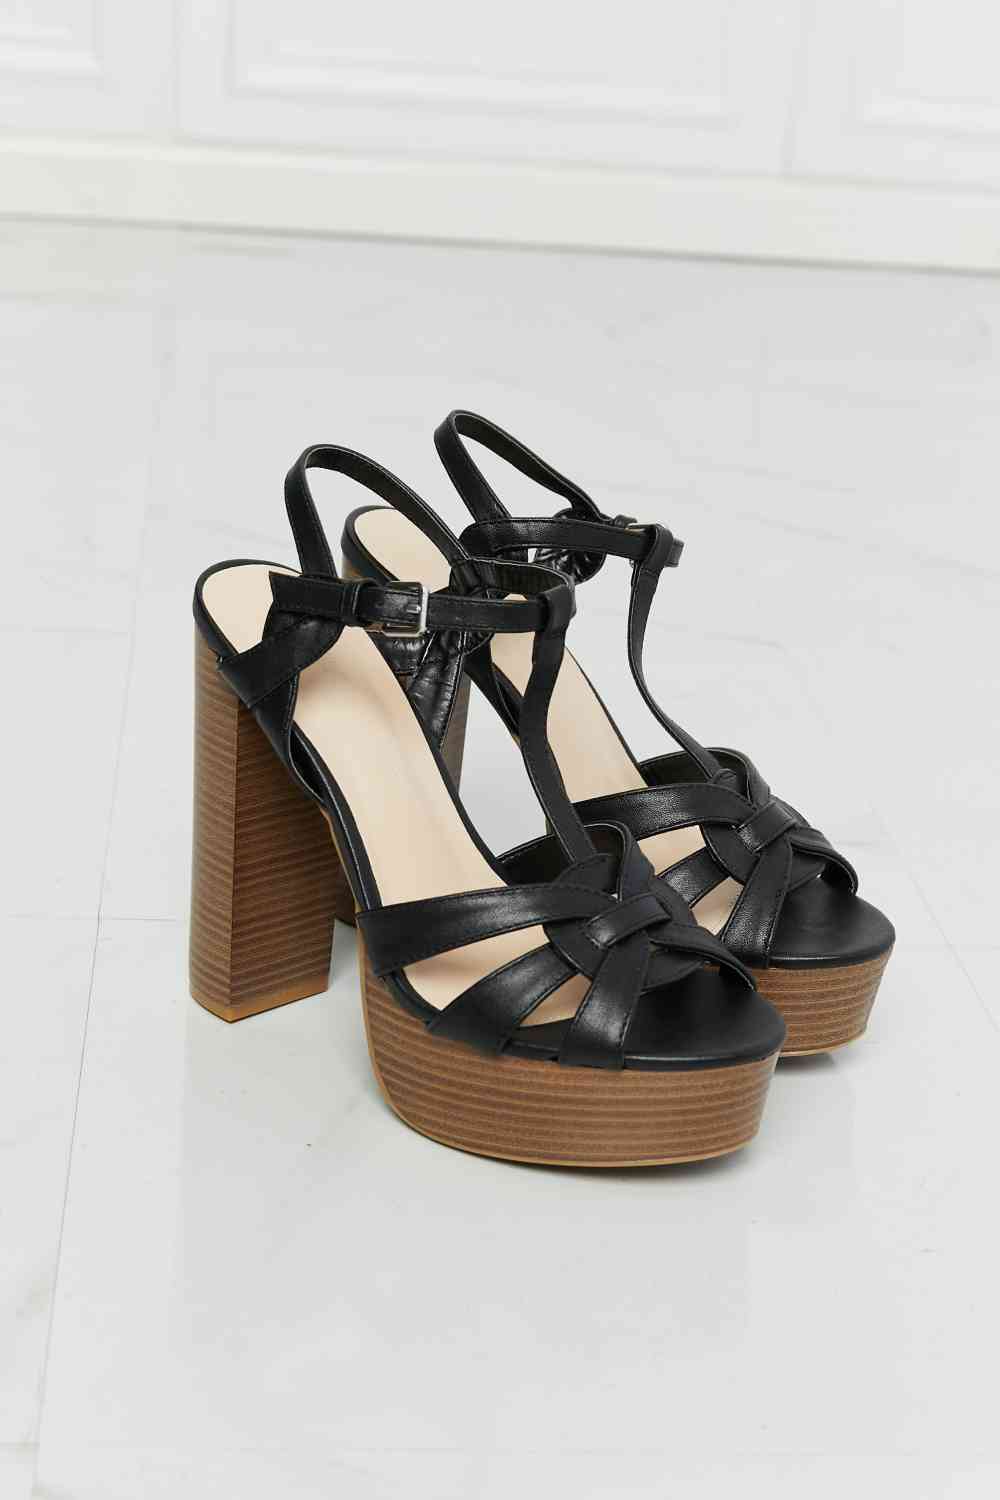 Legend She’s Classy Strappy Heels - Accessories - Shoes - 7 - 2024